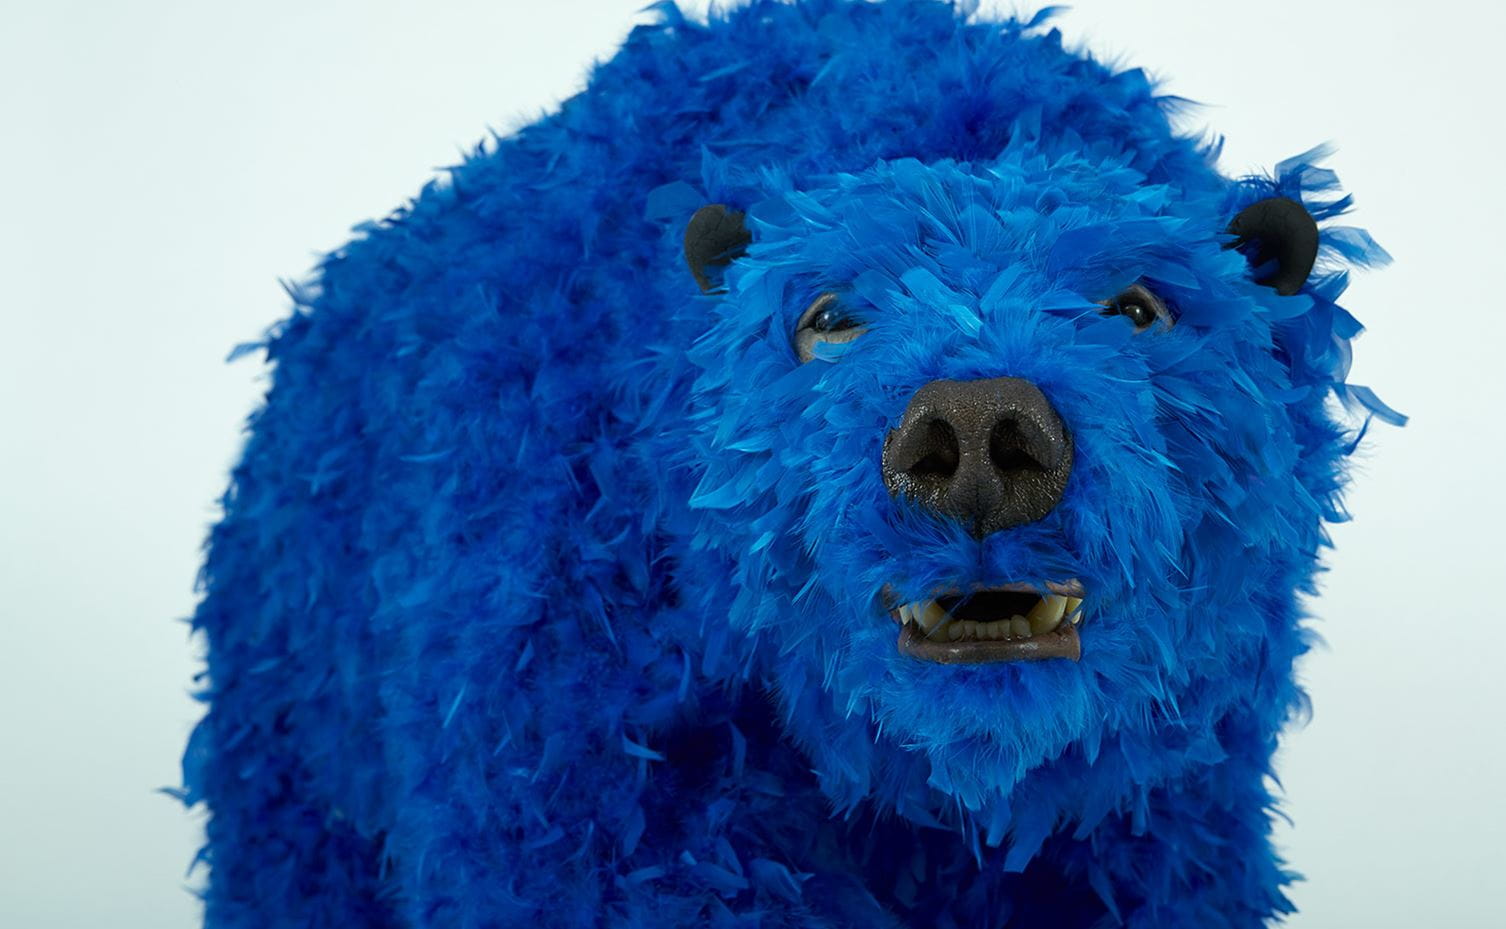 Blue bear from Paola Pivi's Art in Unexpected Places collaboration with Aspen Snowmass